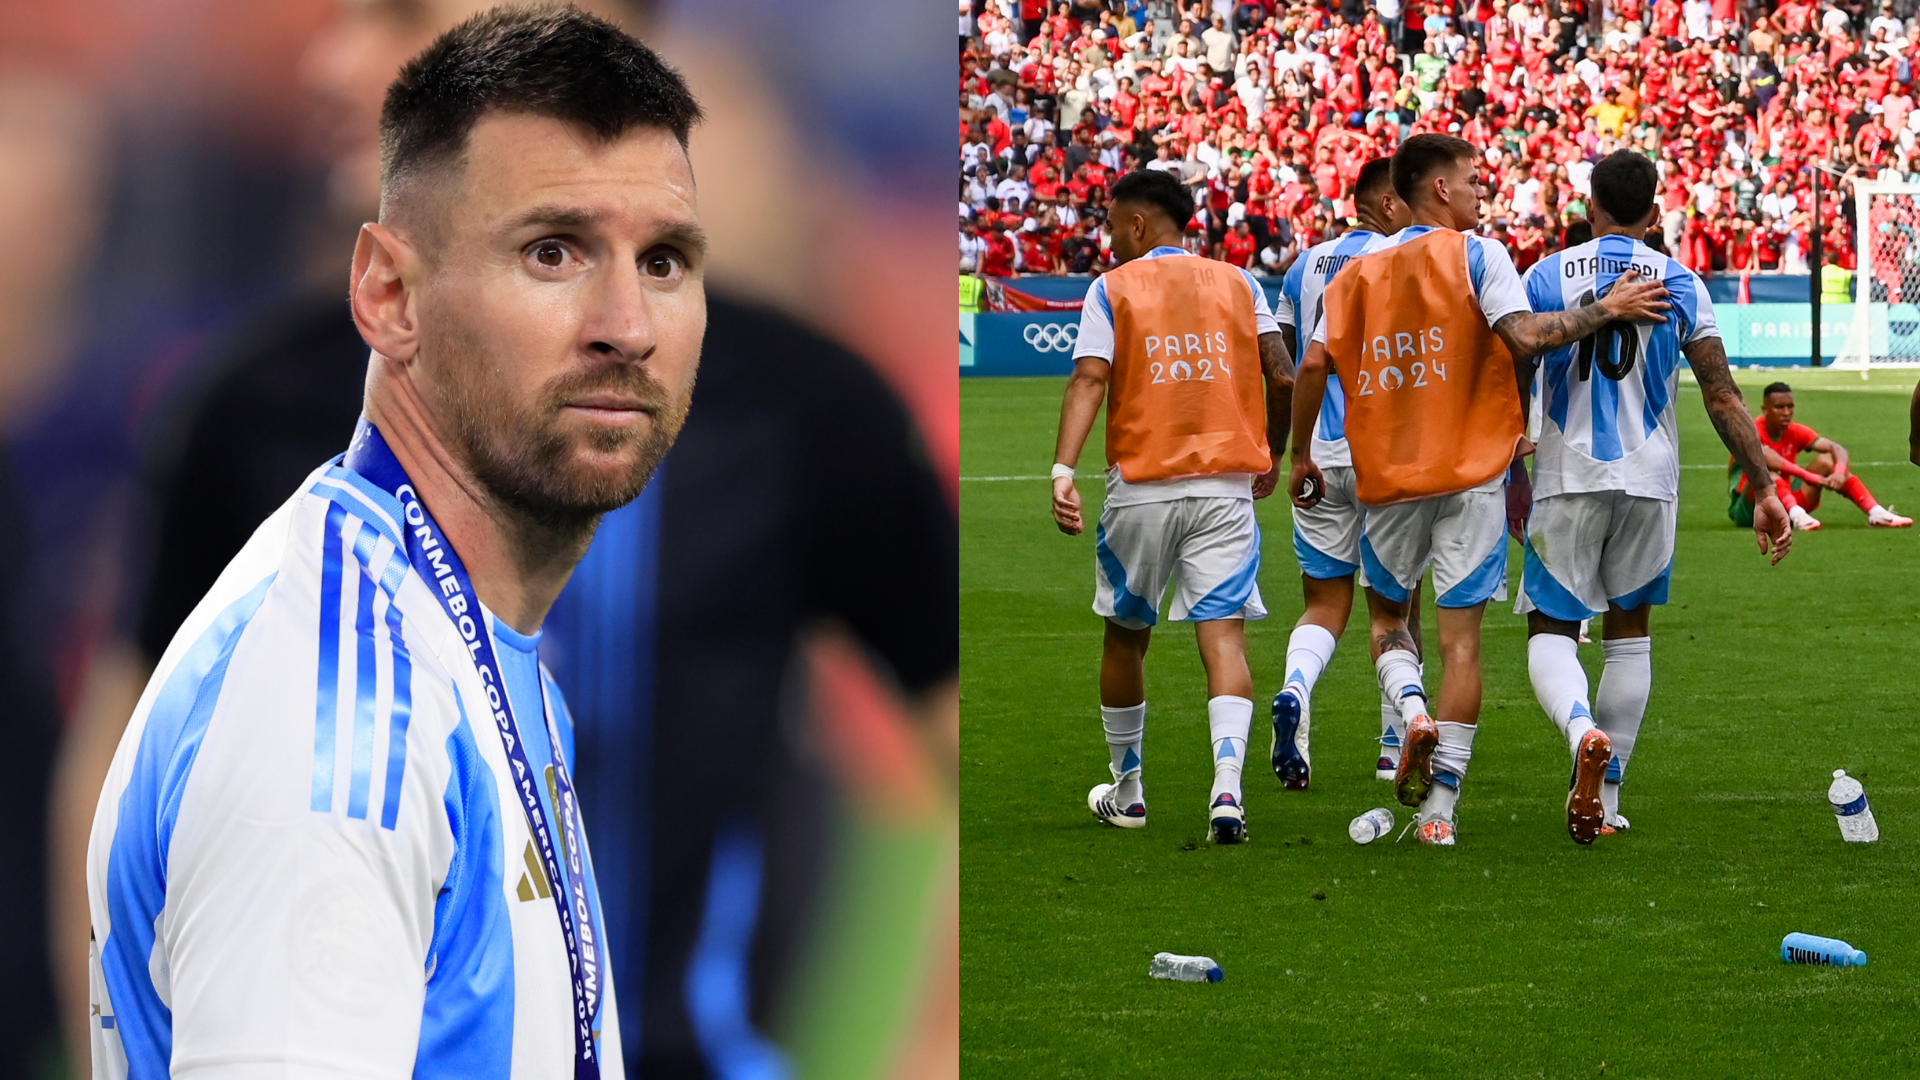 lionel-messi-posts-cryptic-response-after-watching-argentina-s-olympics-opener-against-morocco-descend-into-chaos-as-late-equaliser-leads-to-crowd-trouble-suspension-and-amp-var-drama-or-goal-com-india